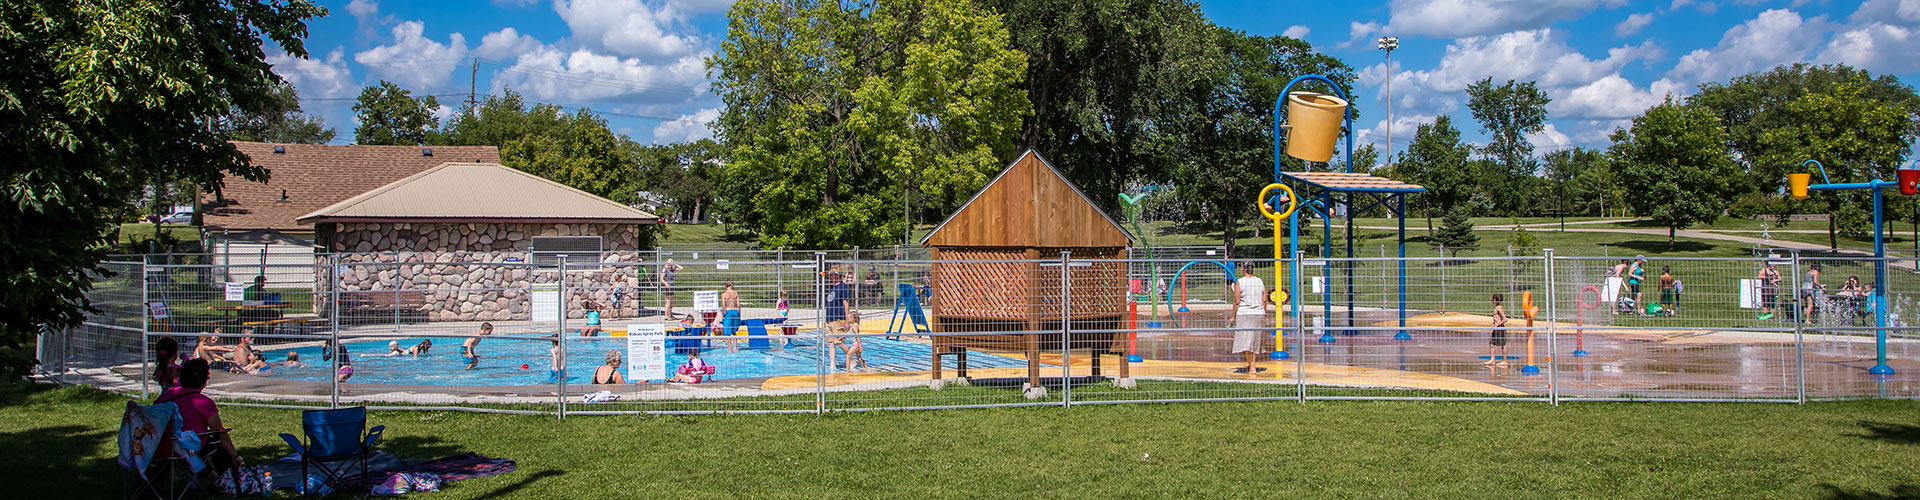 Outdoor swimming pool and spray park at Rideau Park in Brandon, Manitoba